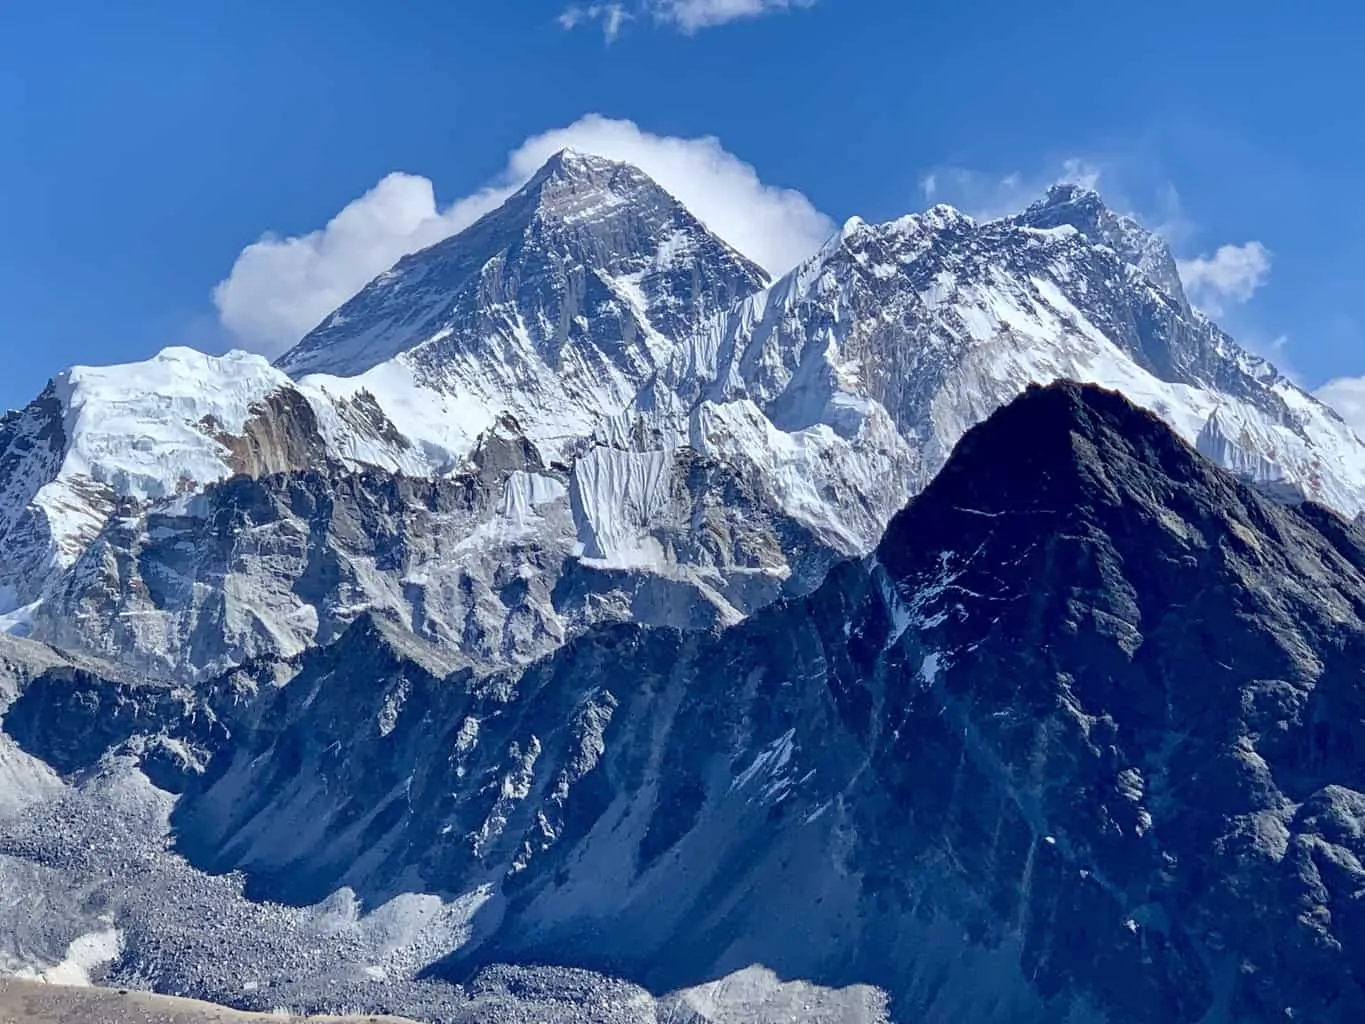 Views of Mount Everest